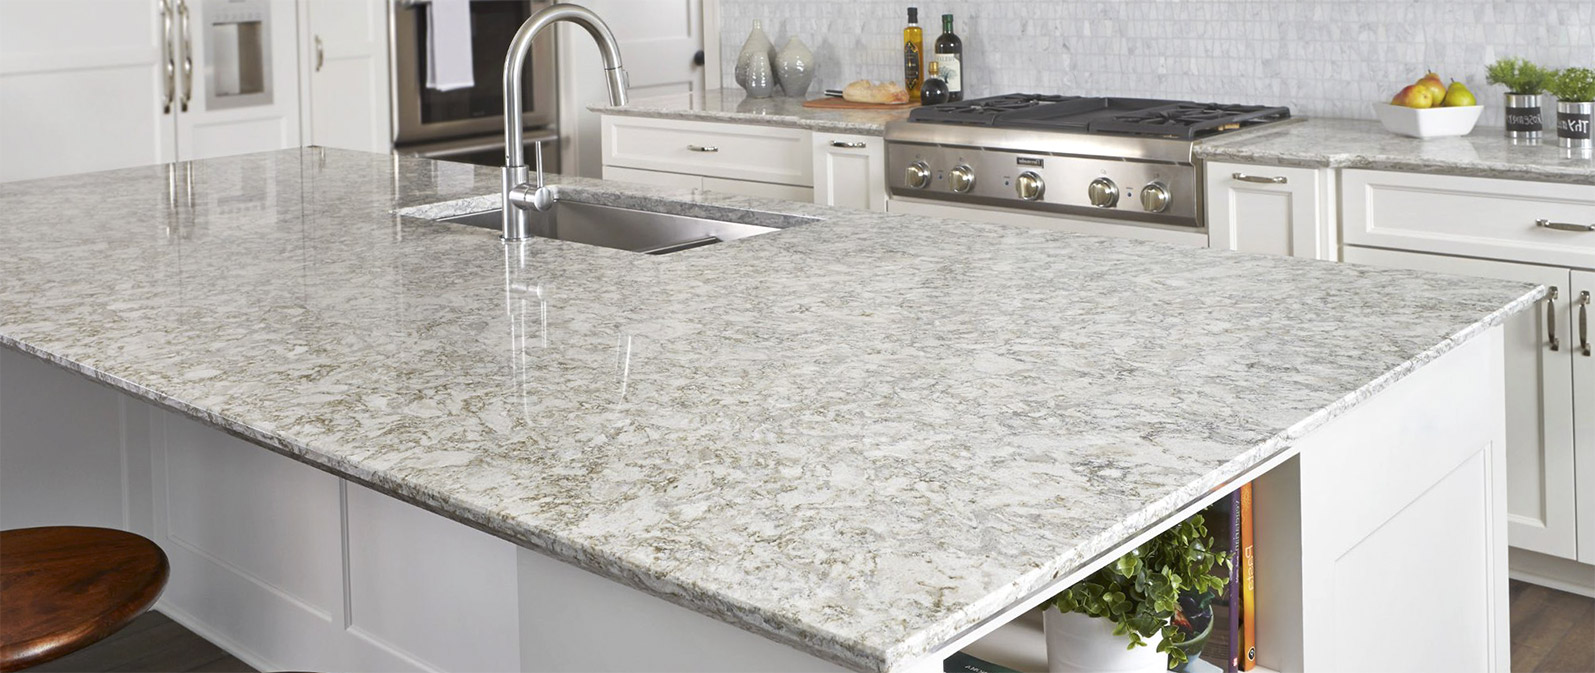 countertops intall and replace 123 kitchen cabinets